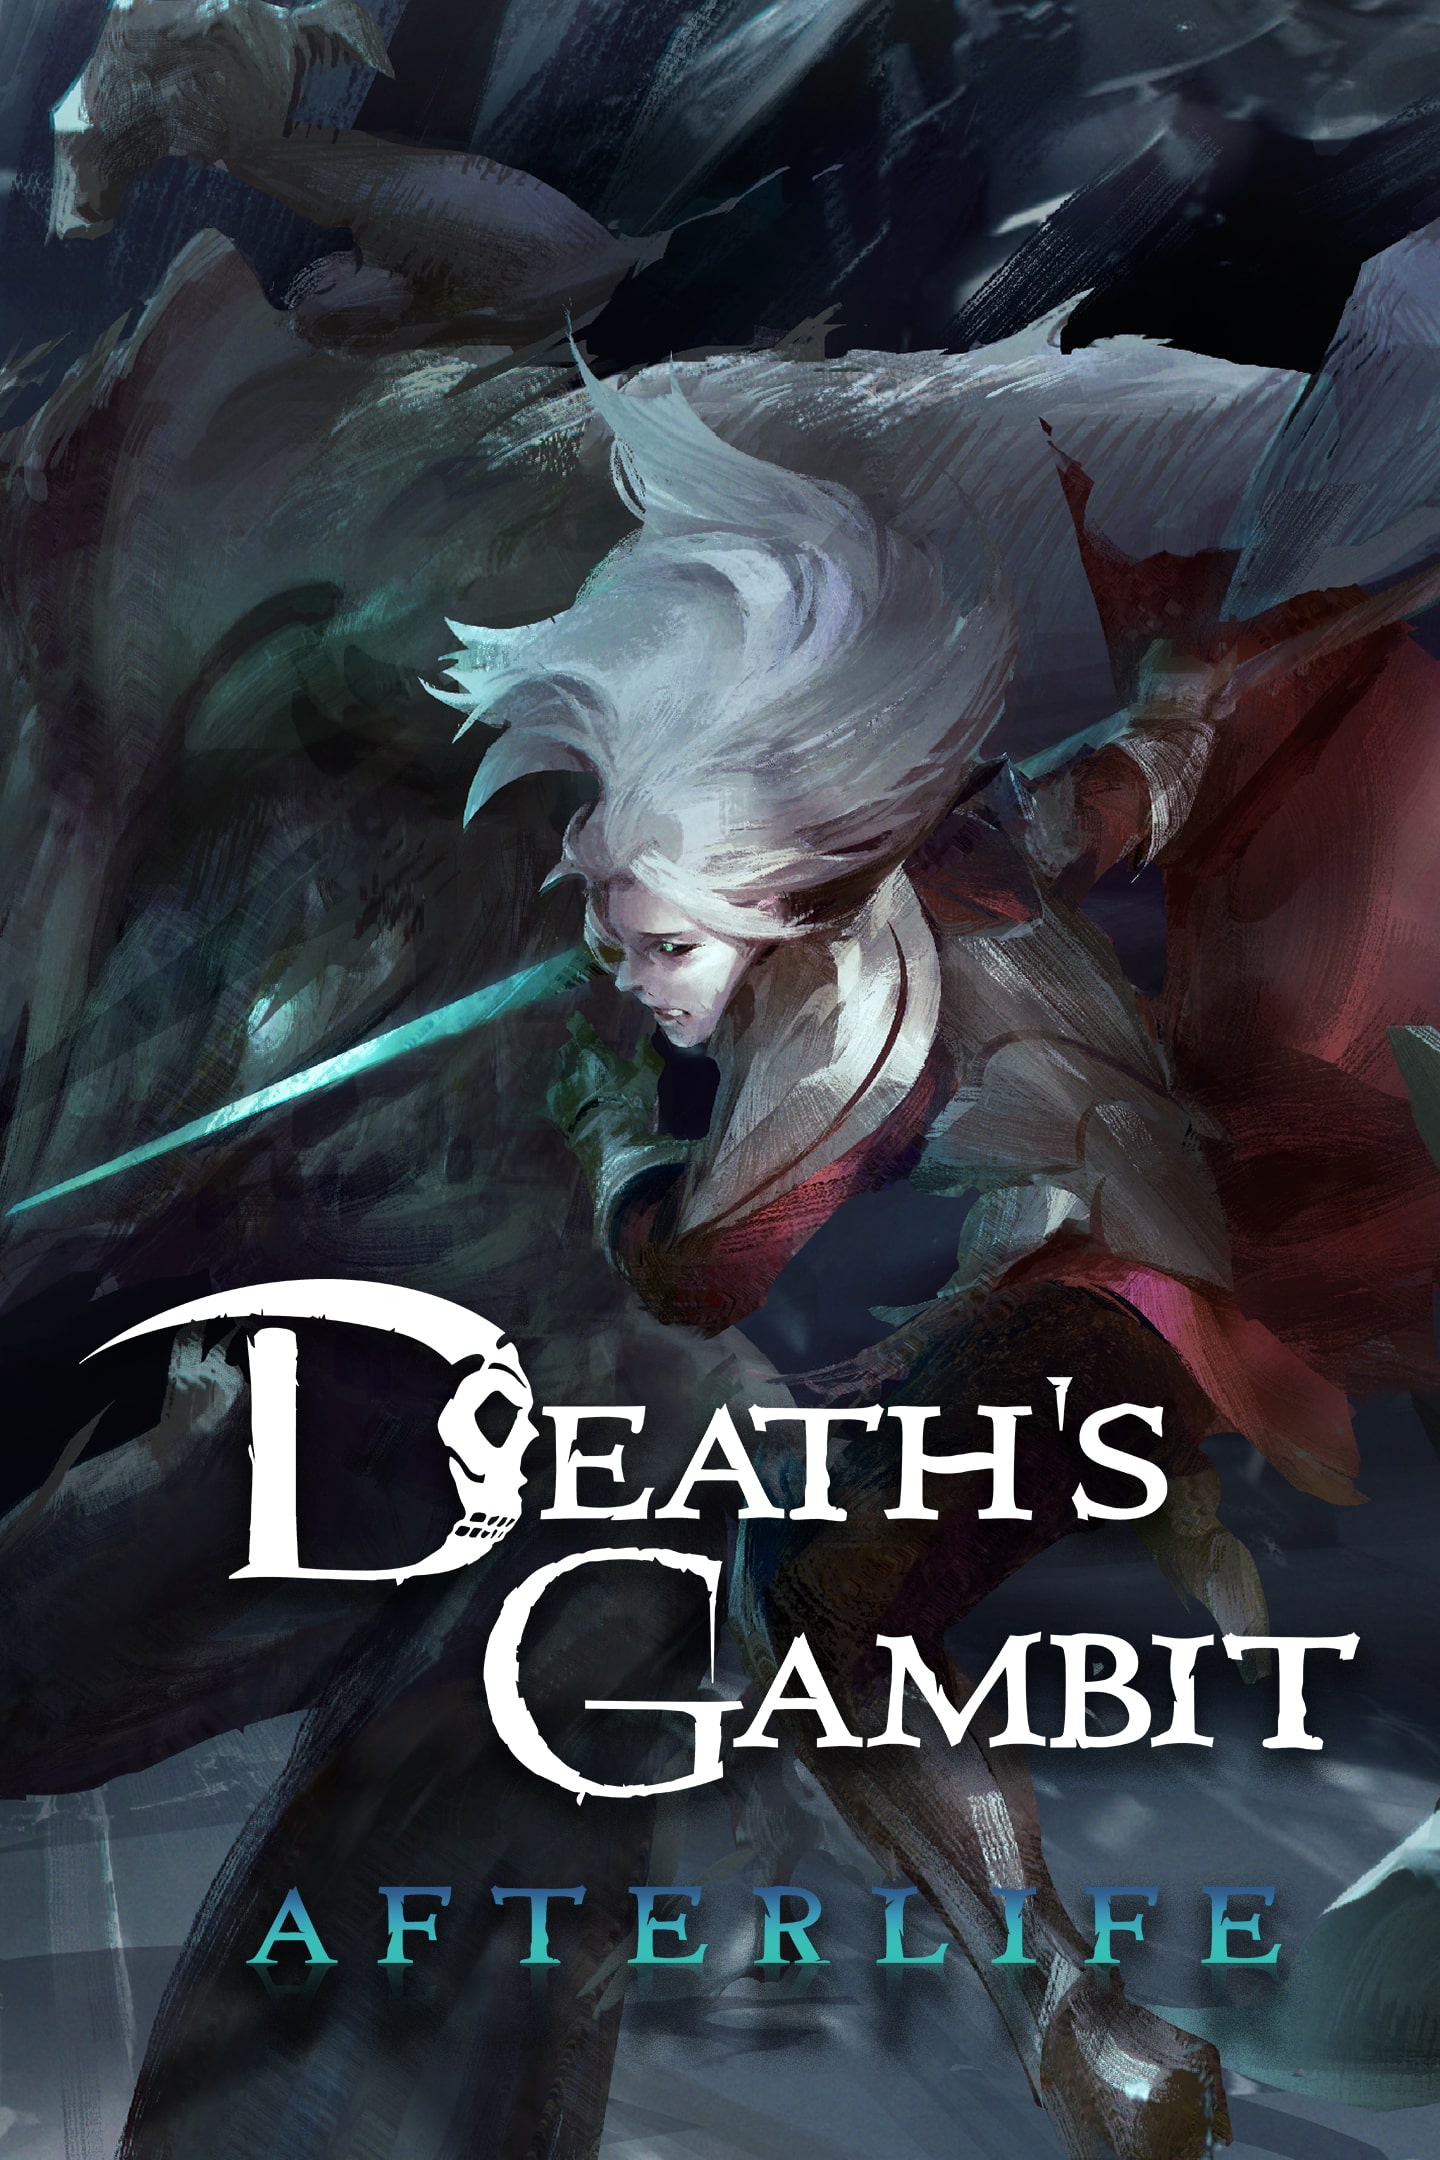 Death's Gambit: Afterlife now available